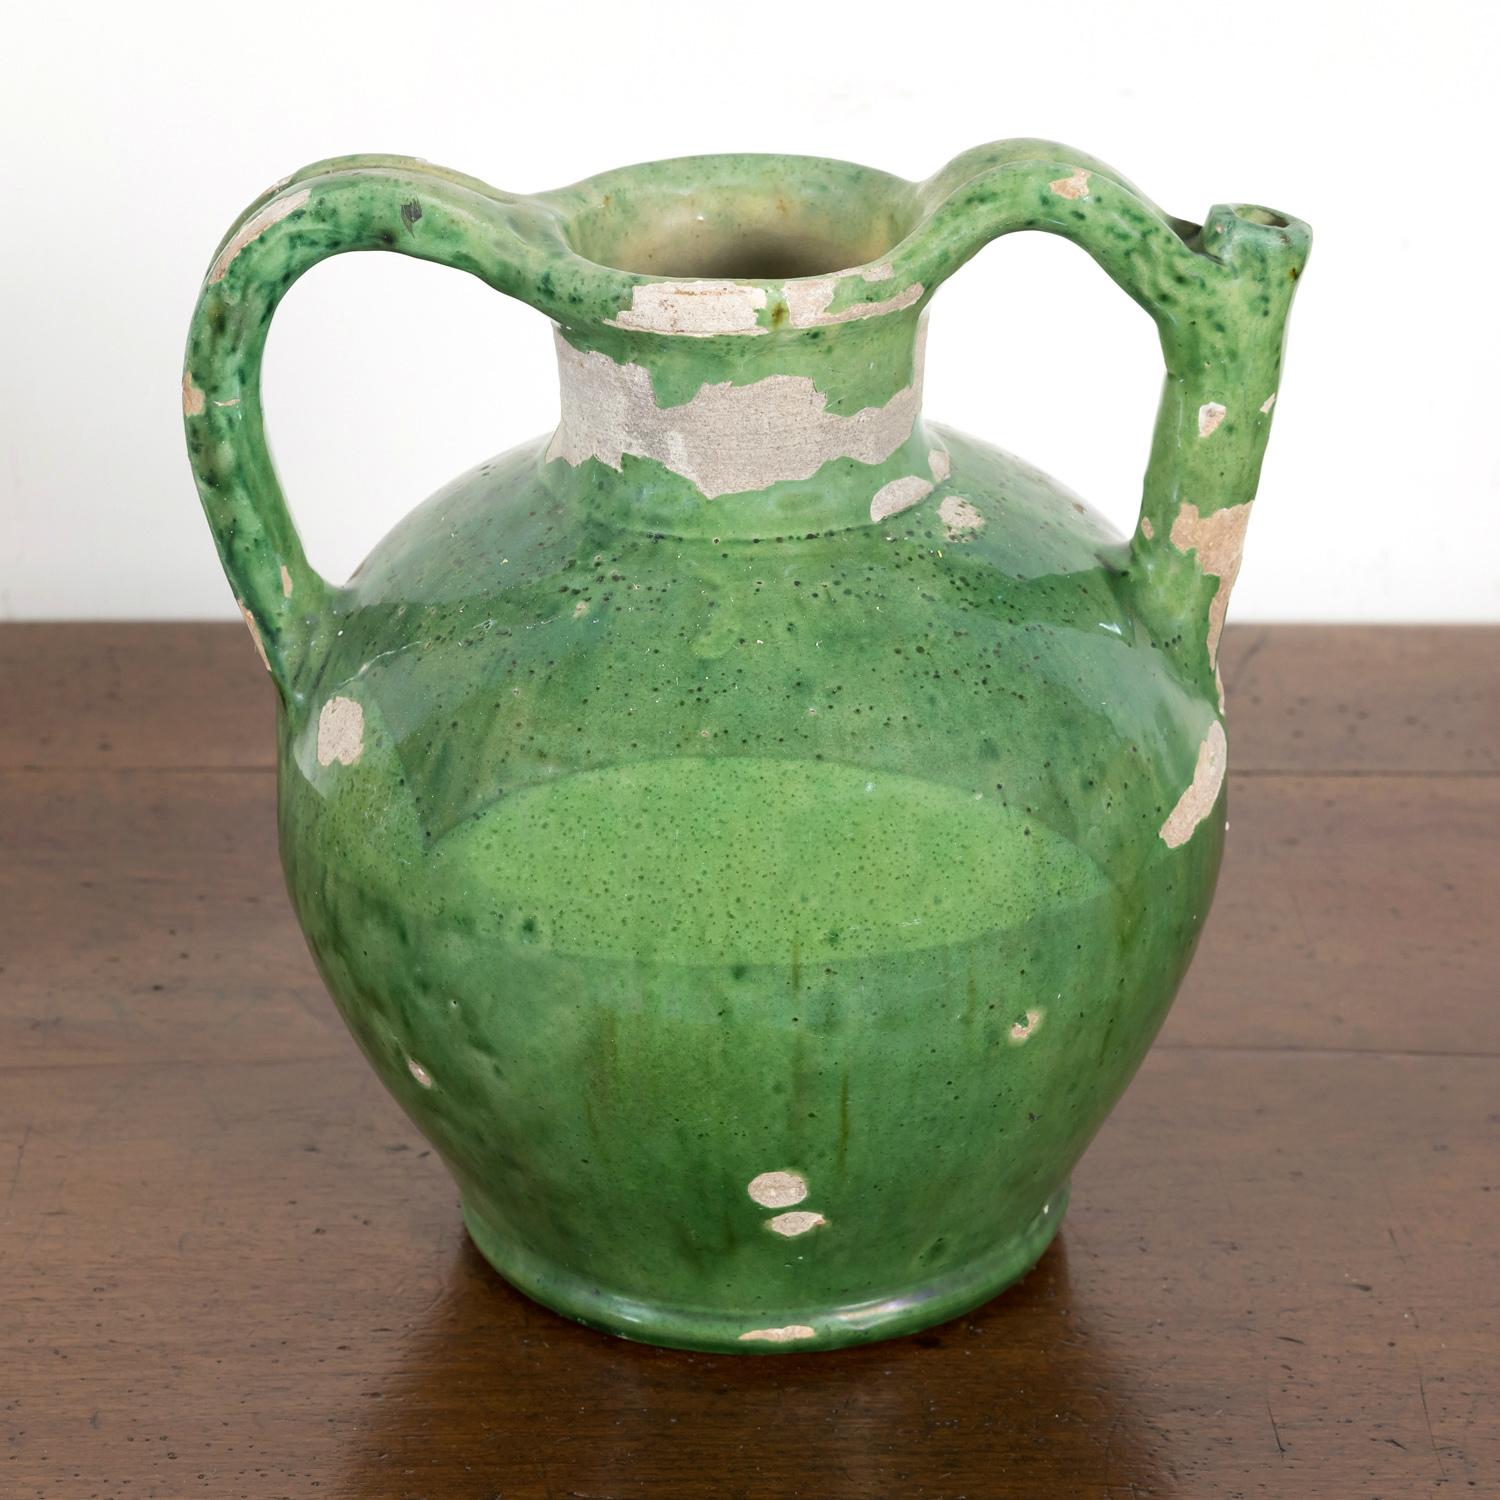 A fantastic mid-19th century French cruche orjol or water jug from the Languedoc region in southwest France, having a rare and luminous green glaze and two beautifully arched handles that rise above the opening with the spout formed into the handle